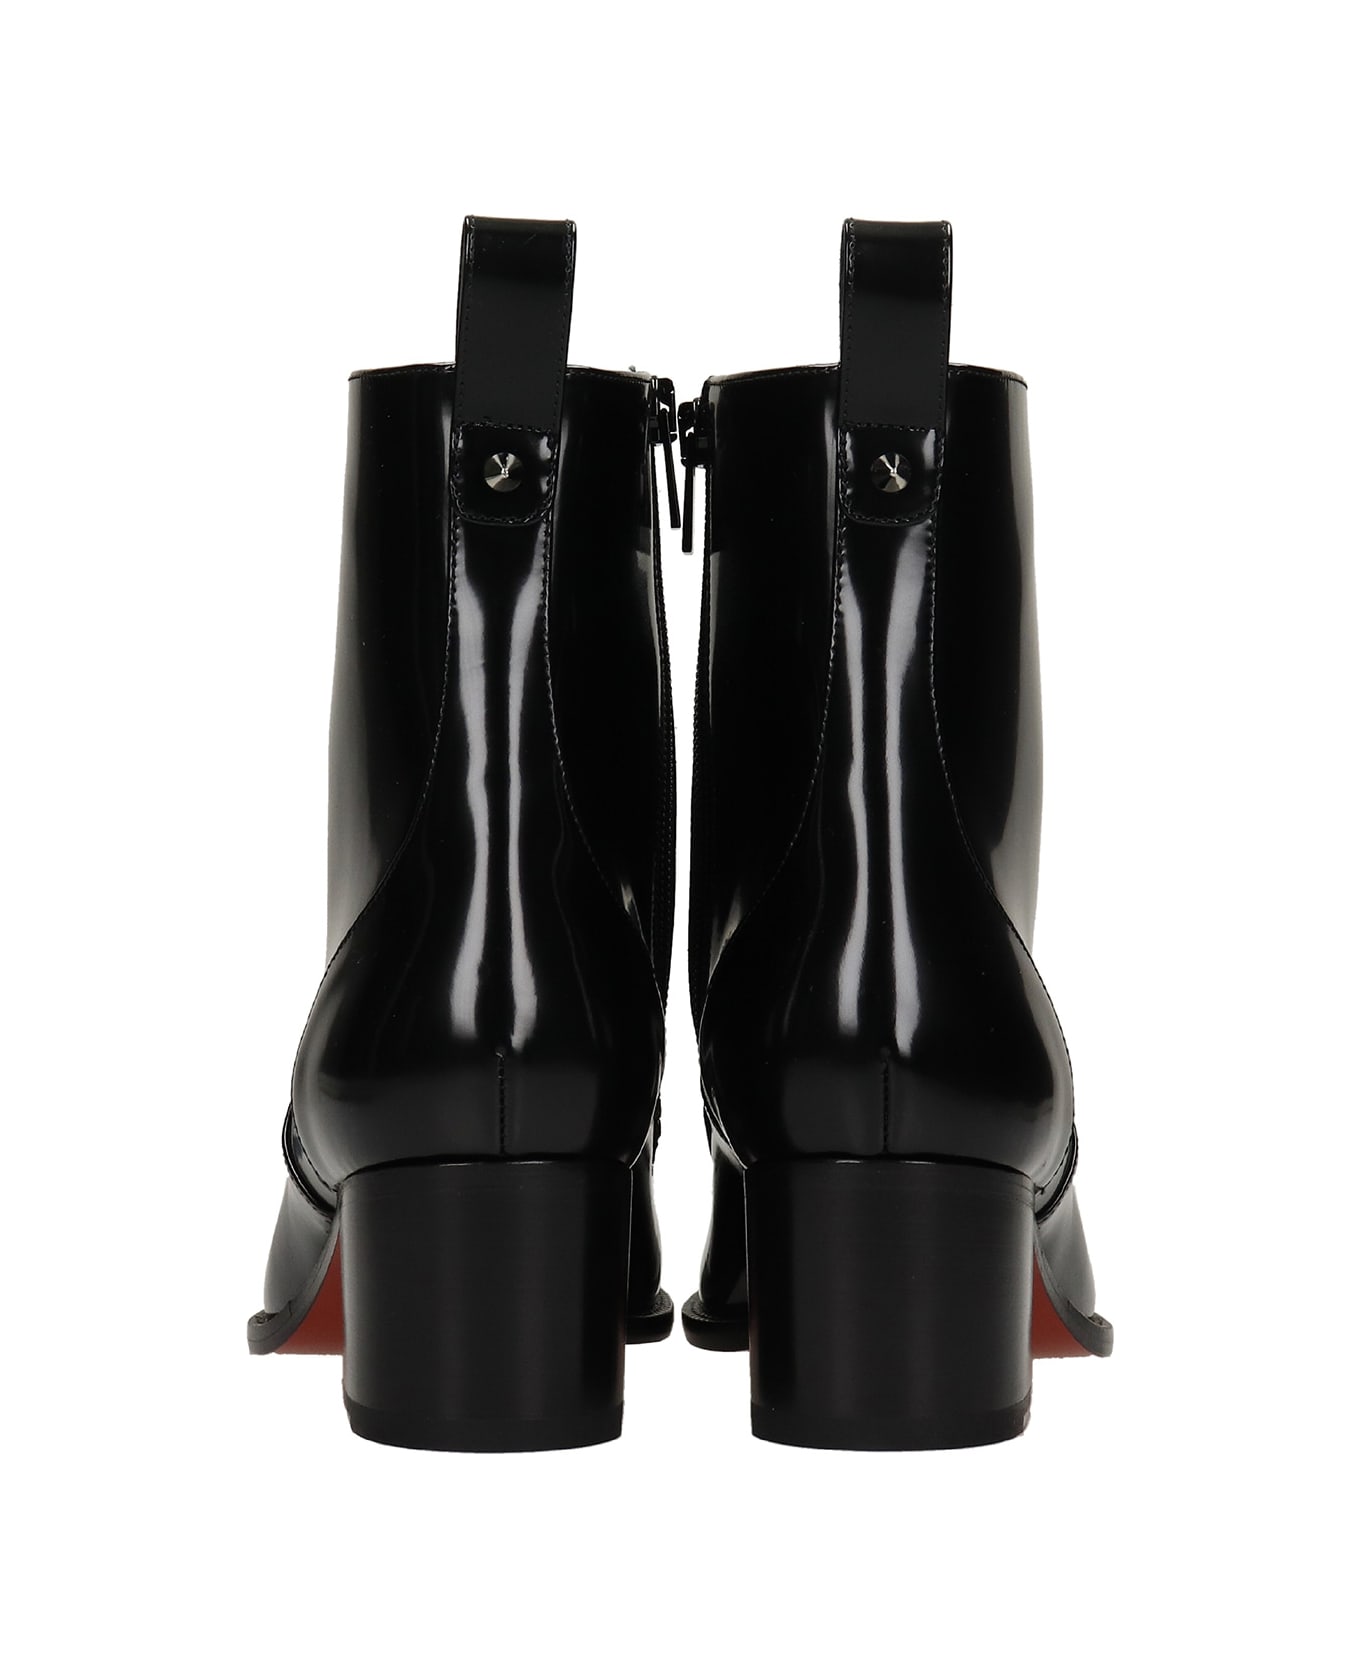 Christian Louboutin Mayerswing High Heels Ankle Boots In Black Leather - black